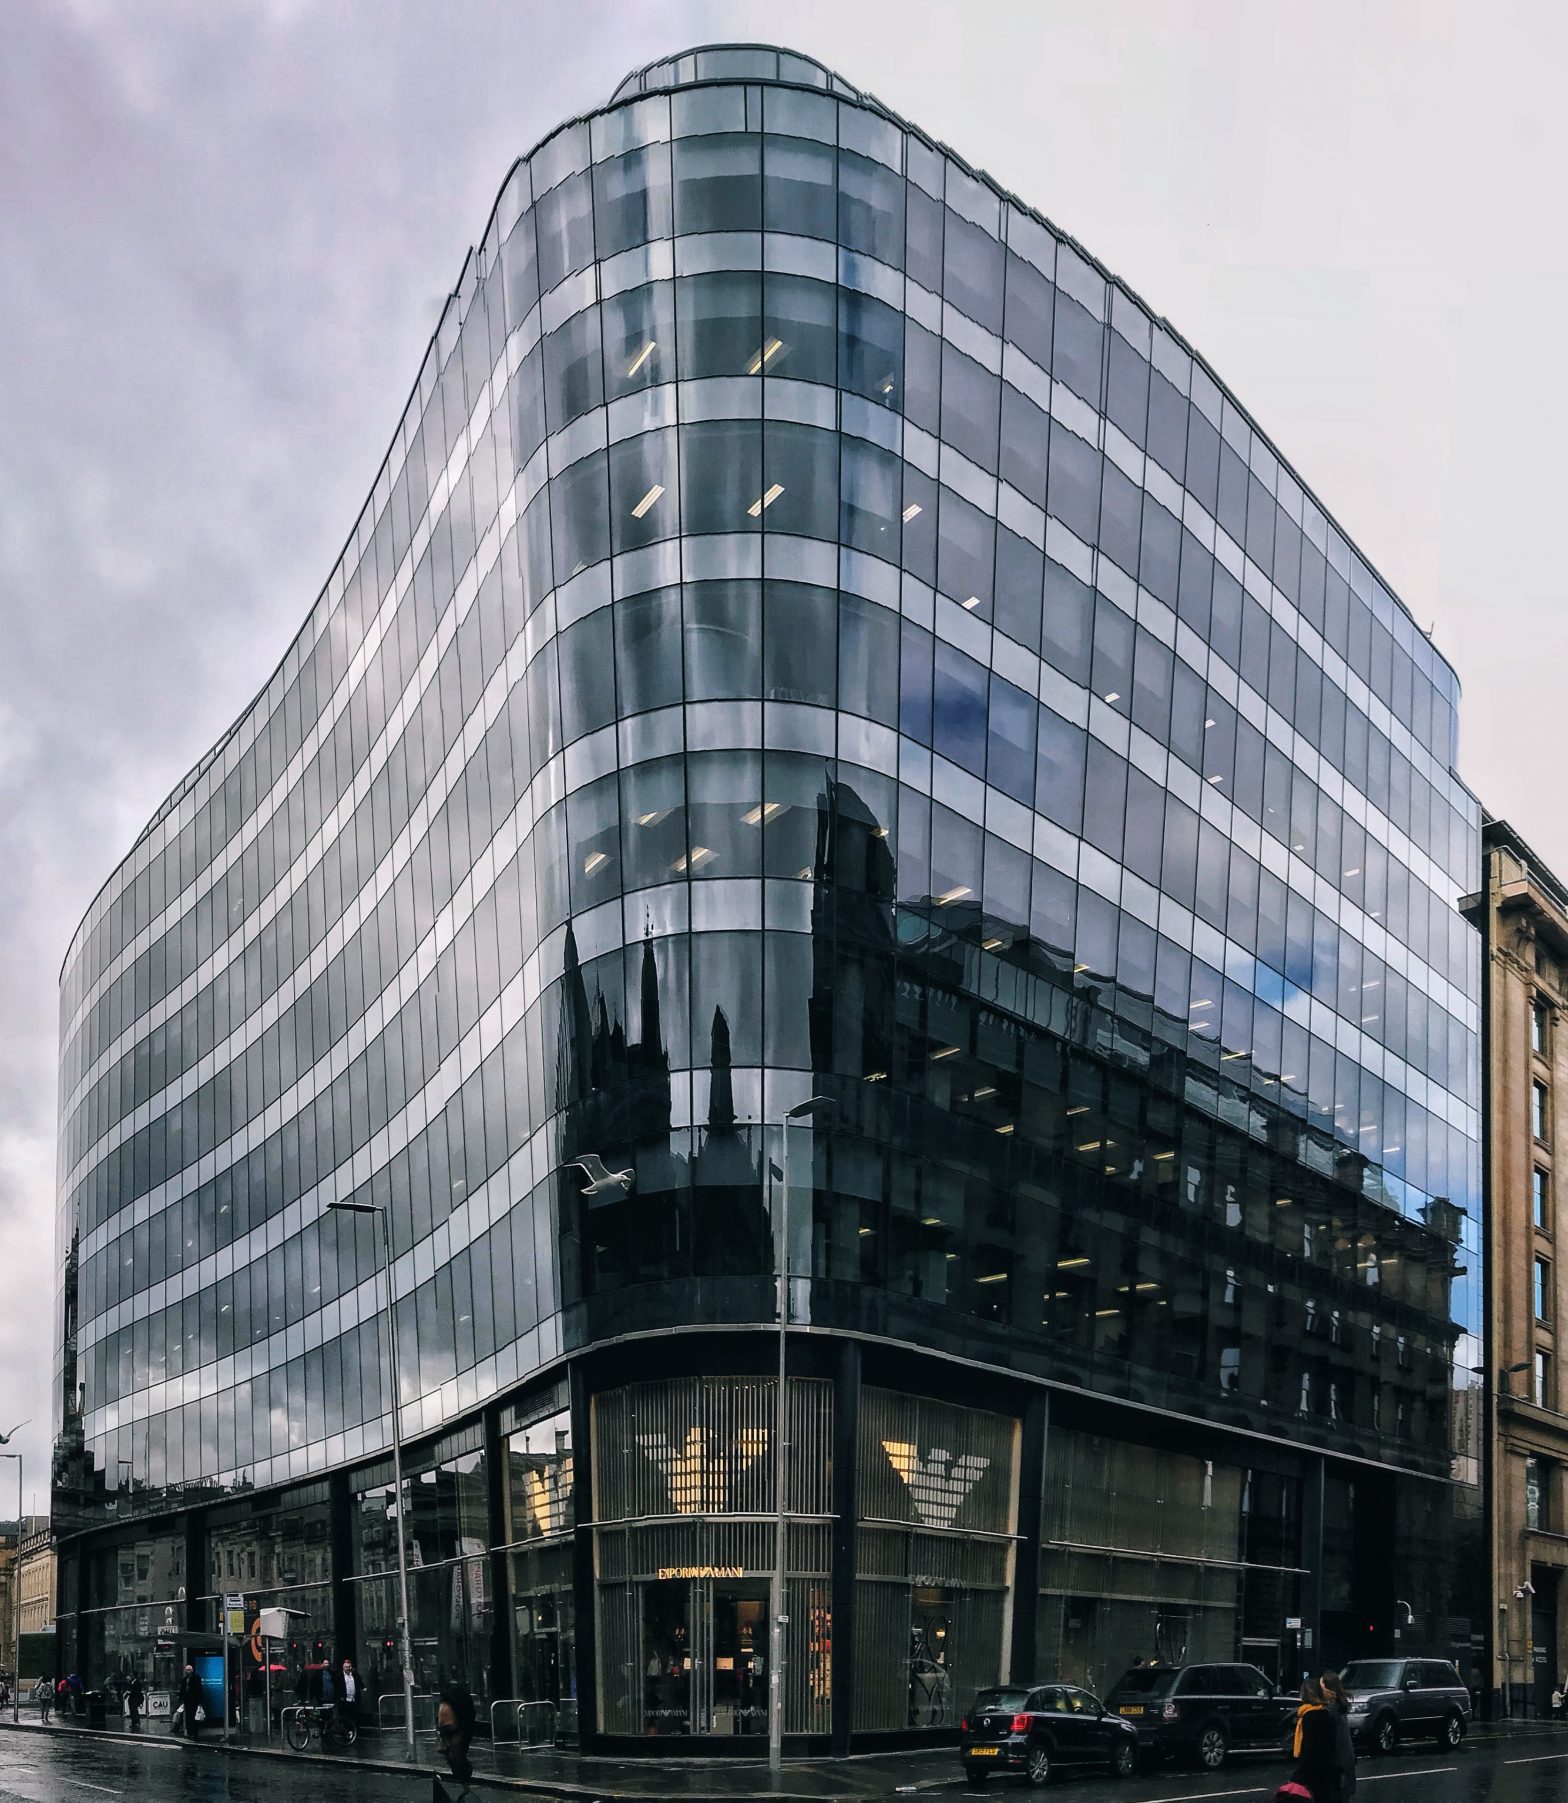 Connect110ns, Glasgow